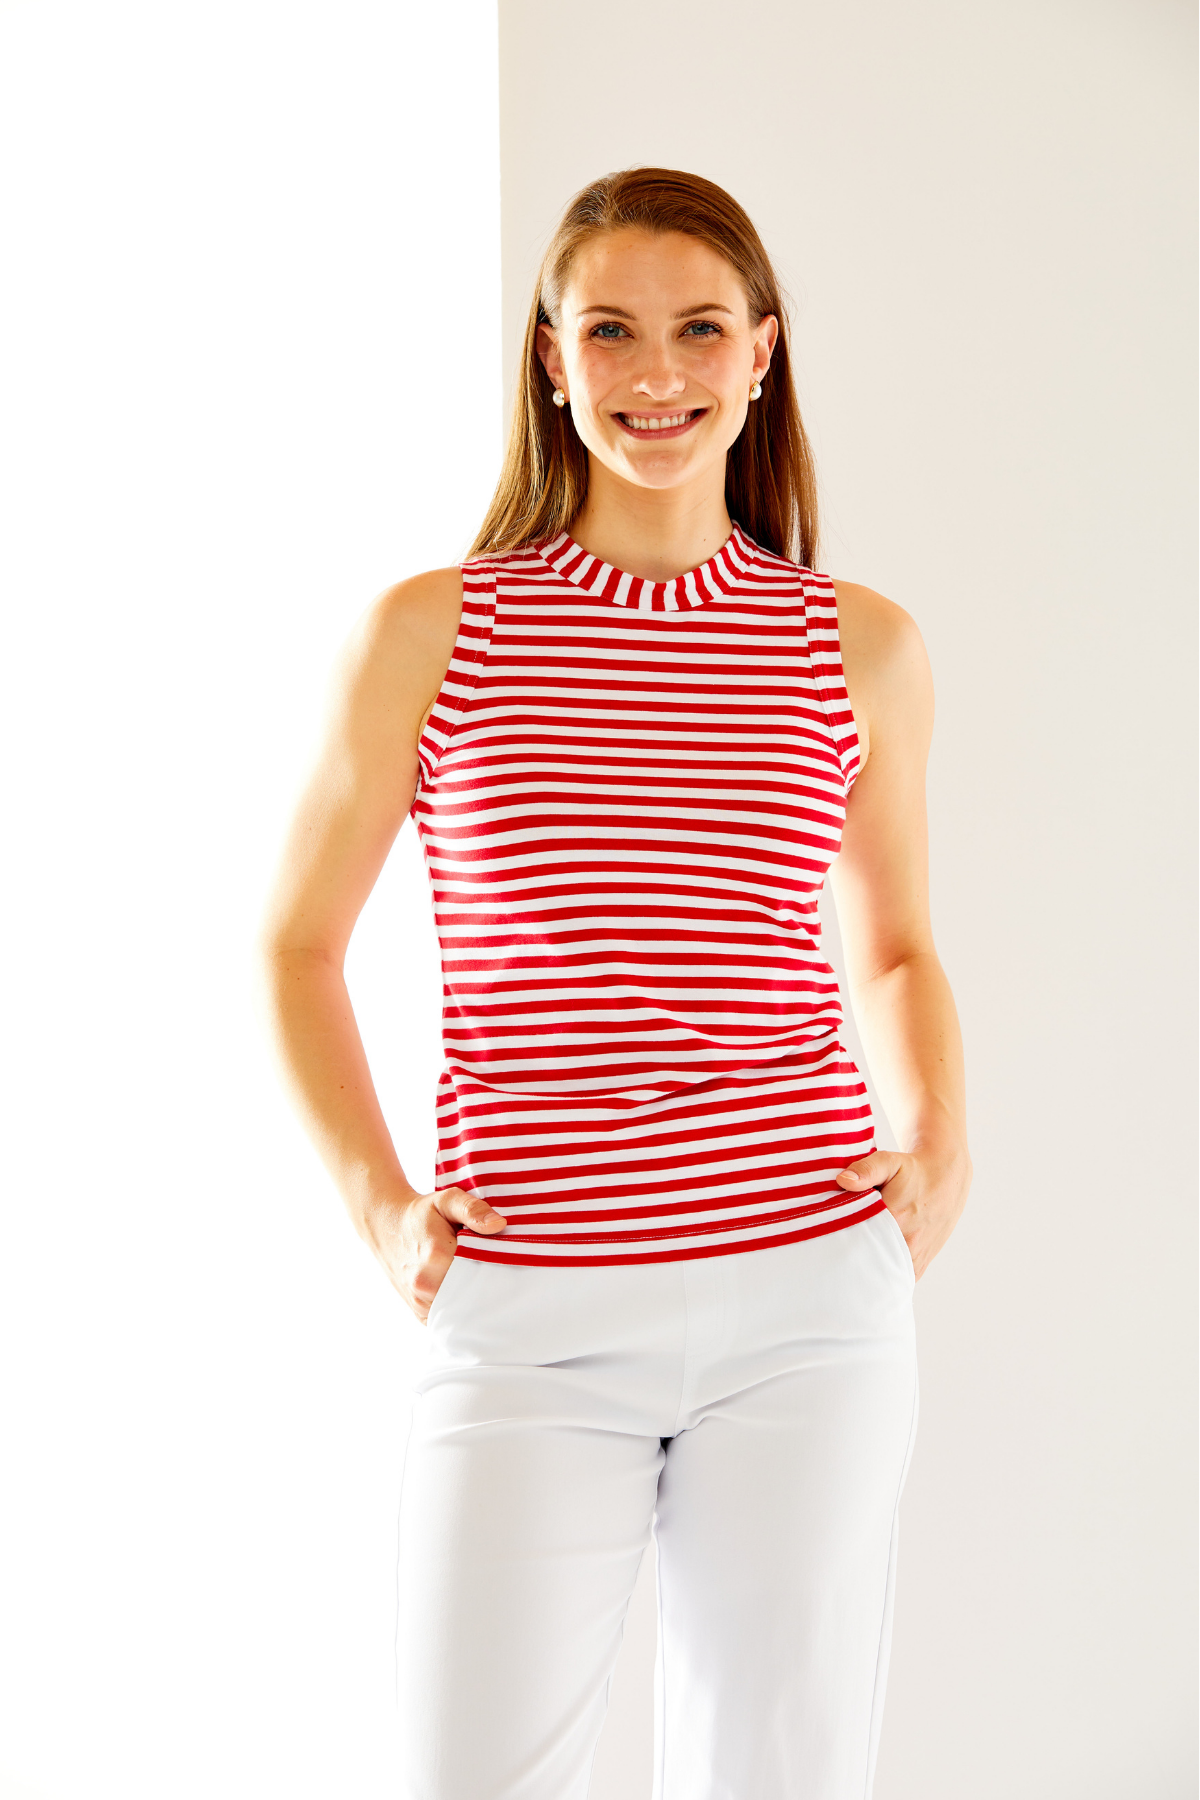 Woman in red/white stripe top